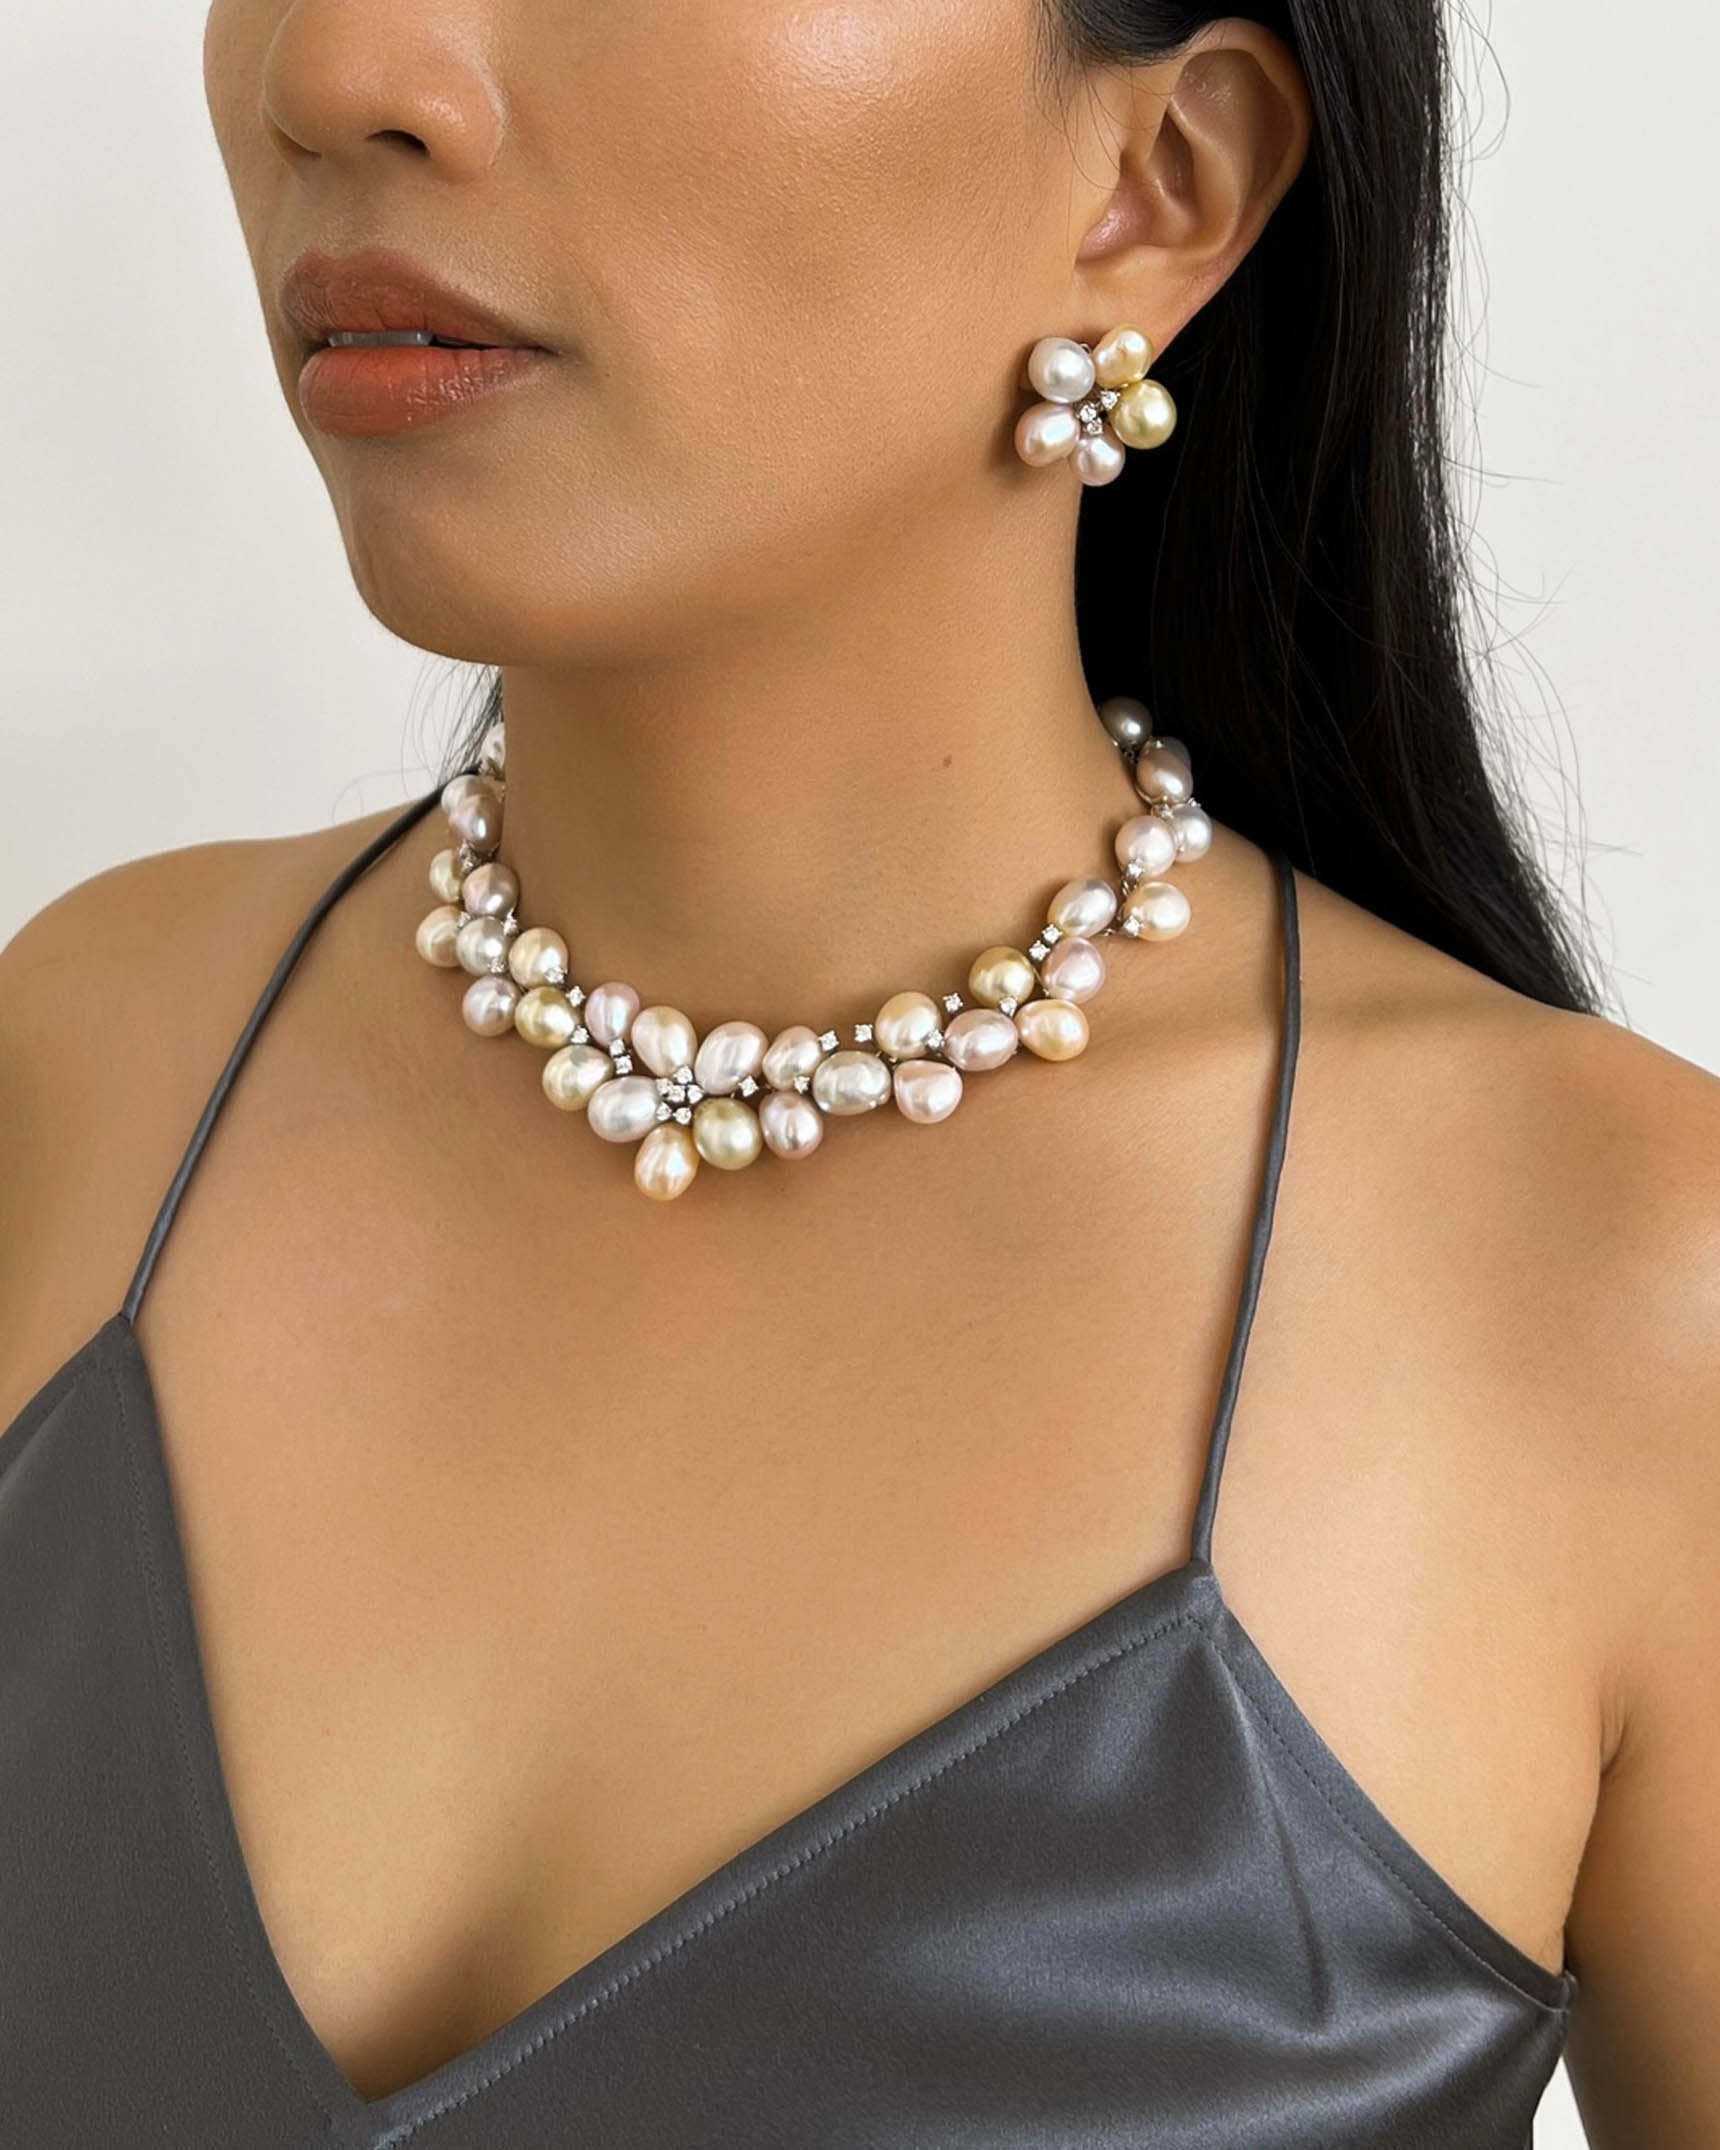 Baroque Pearl Earrings and Necklace EPDI00869 – PRL1600794